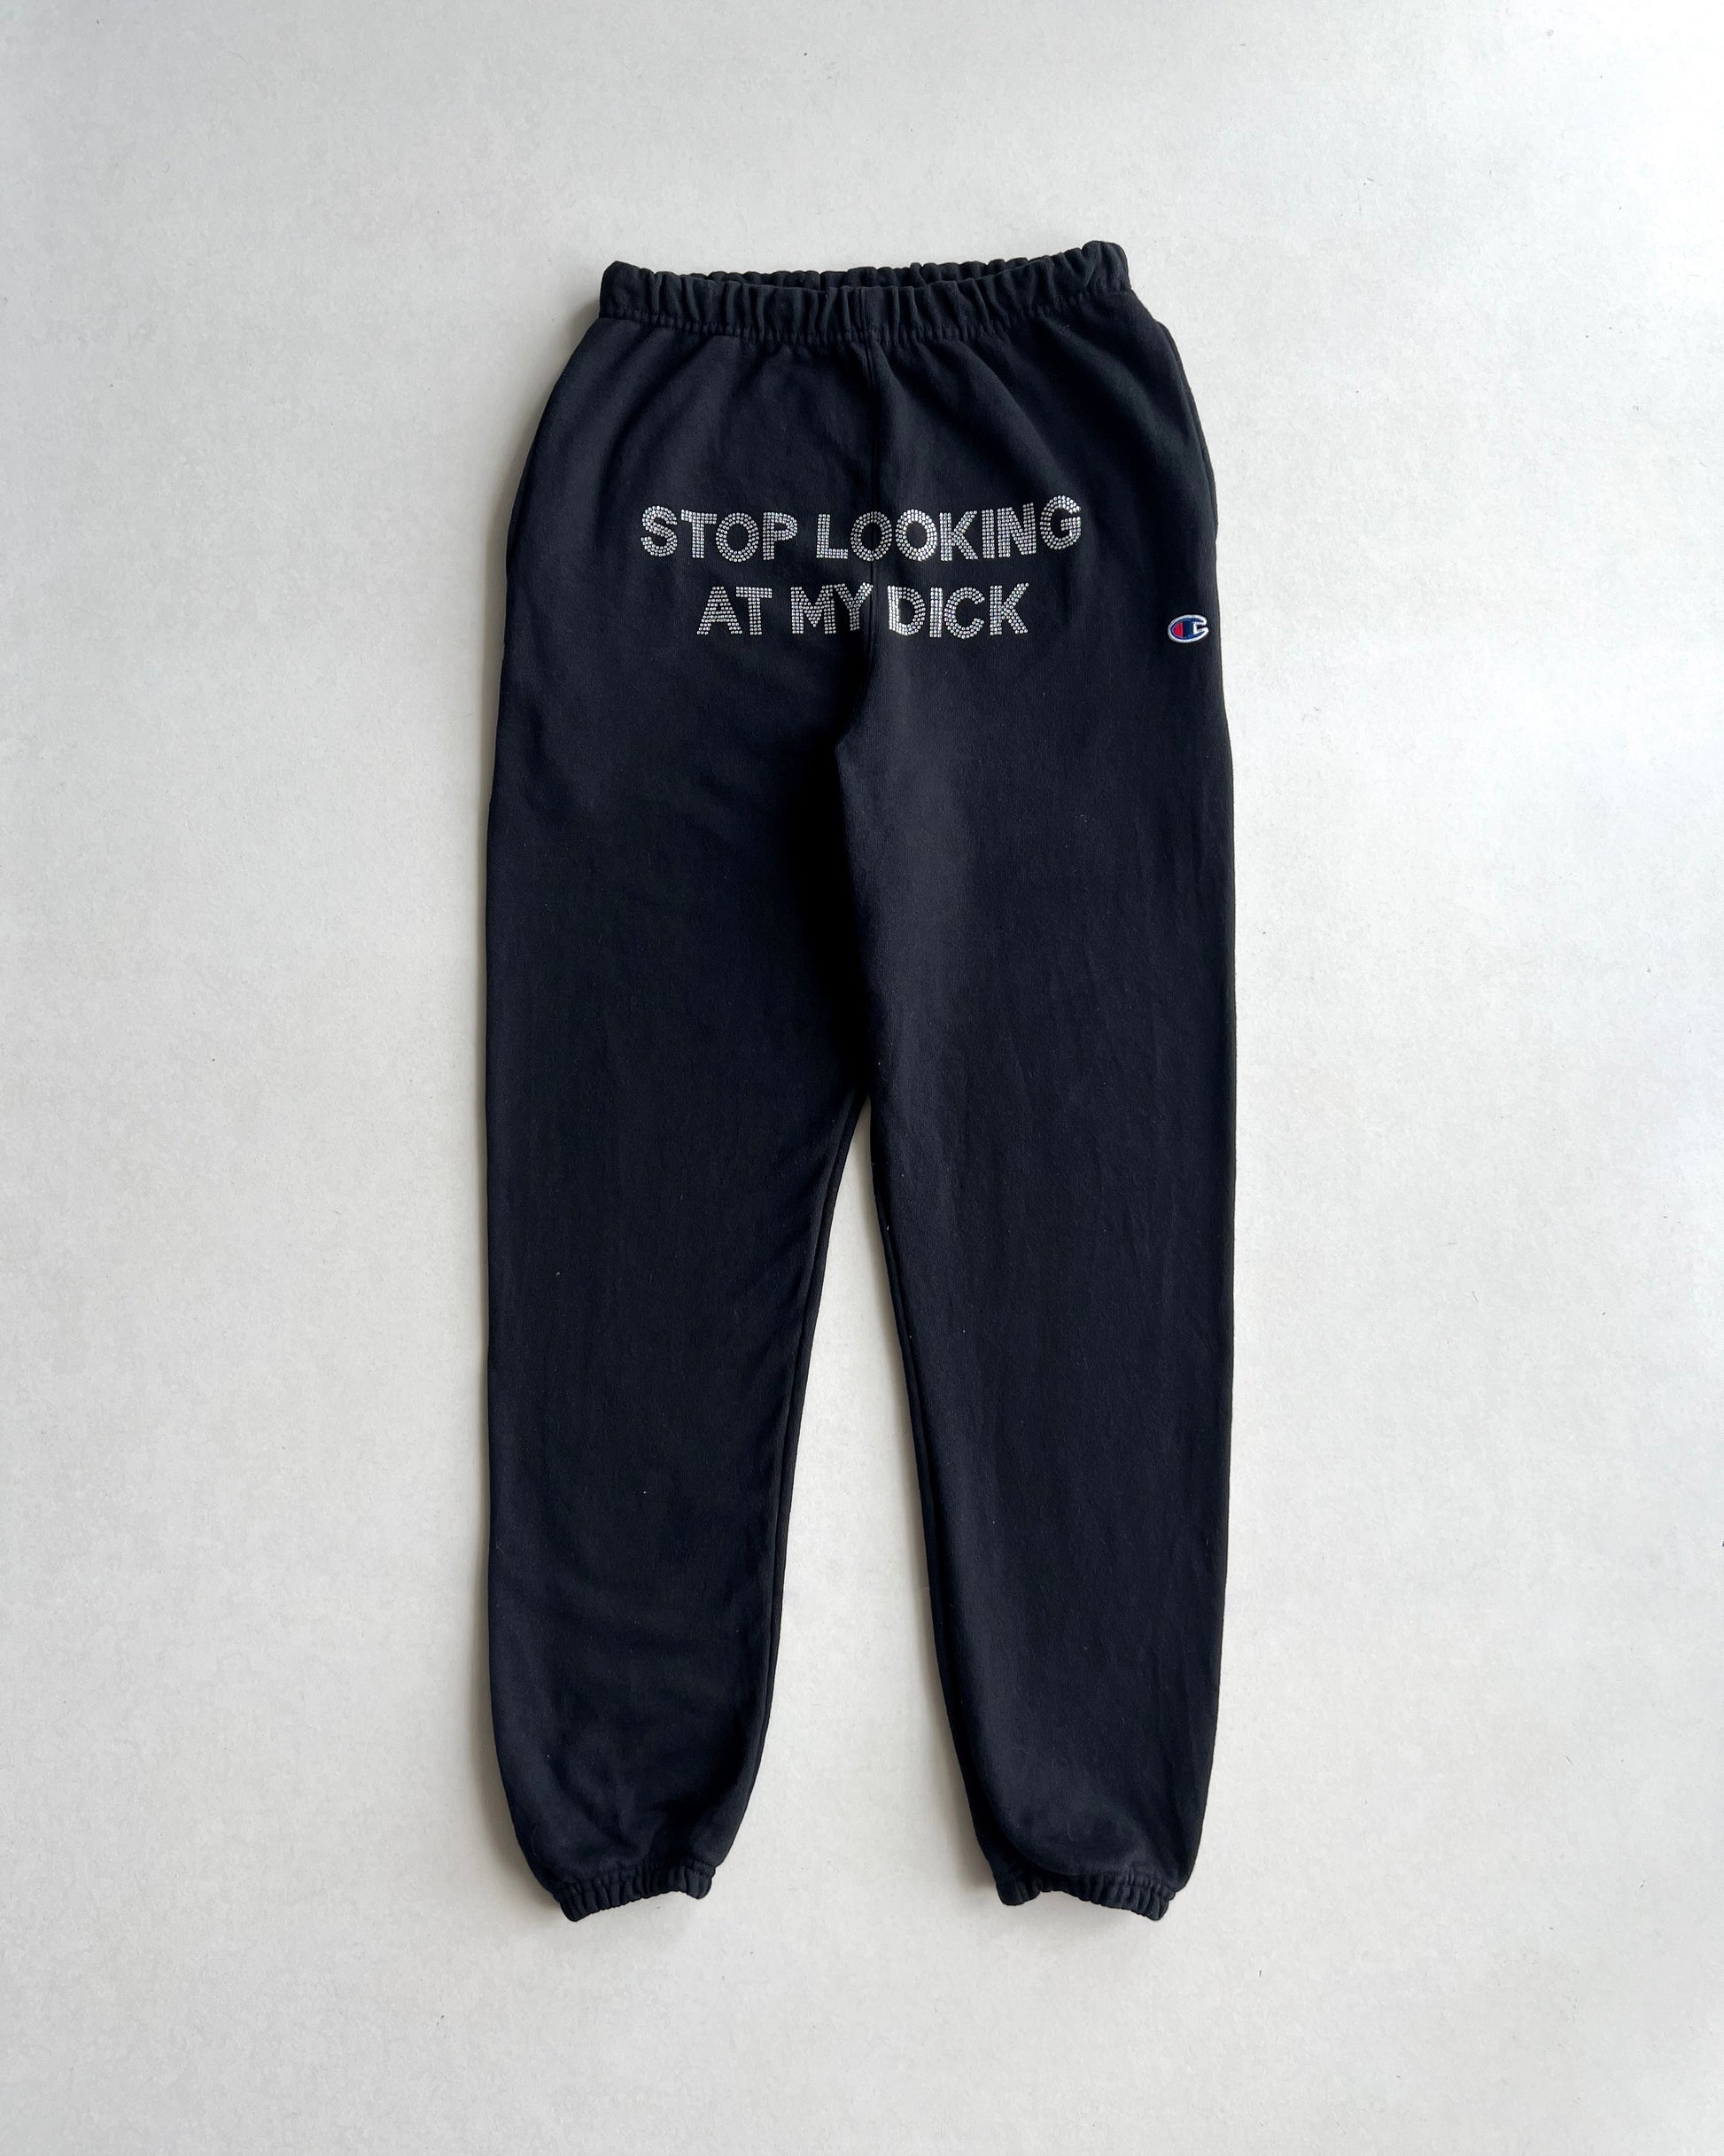 2000S CHAMPION 'STOP LOOKING AT MY DICK' SWEATPANTS (26-34